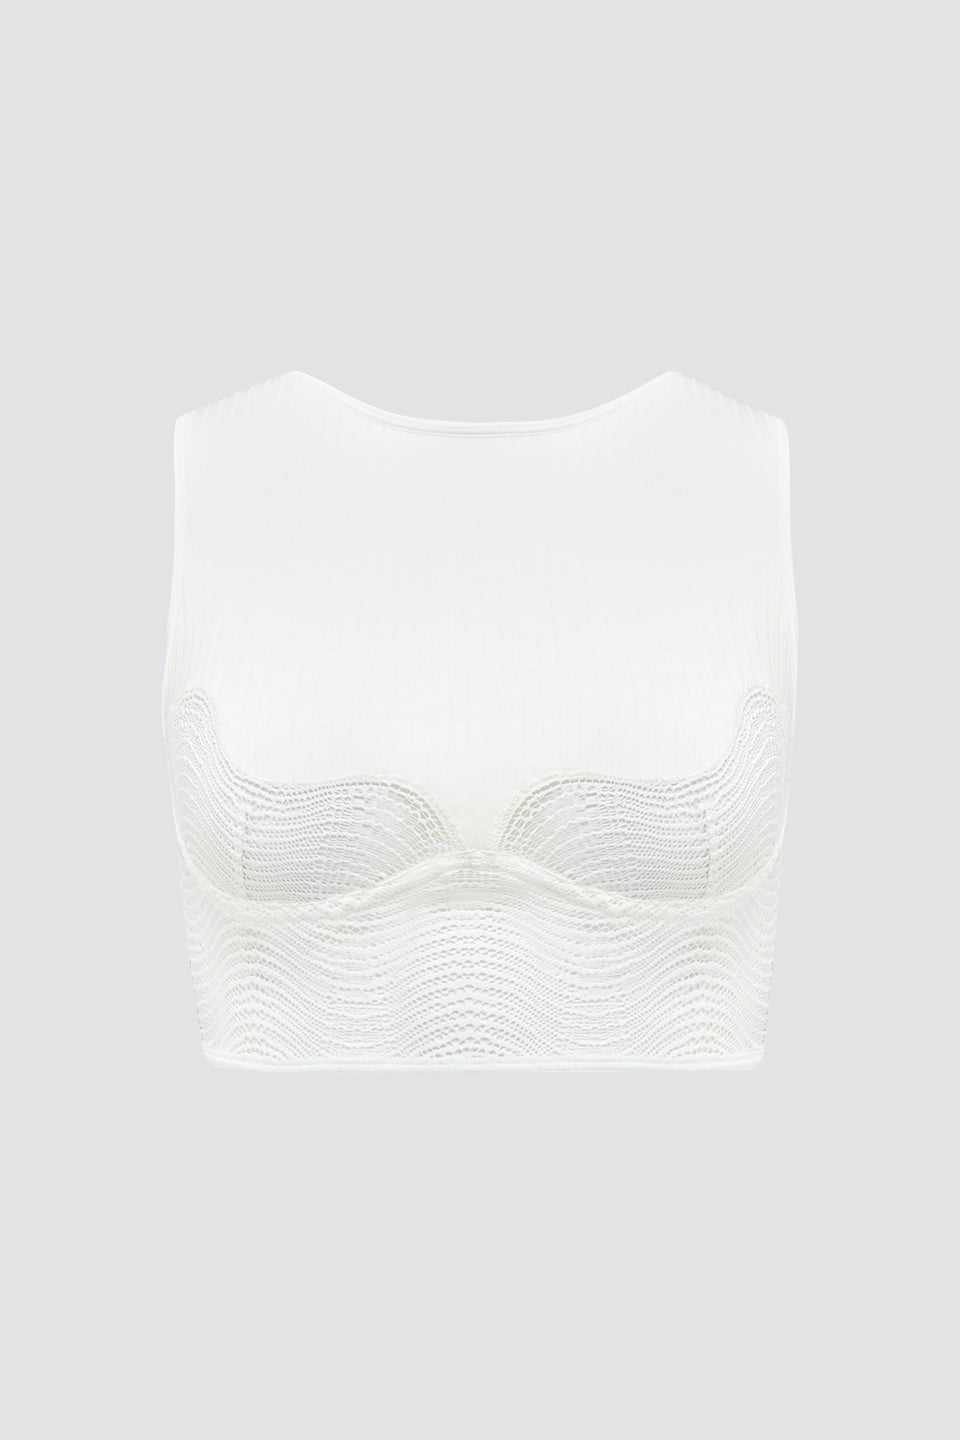 Opaak: Lea Ribbed Cropped Top - Daylight, S, M.